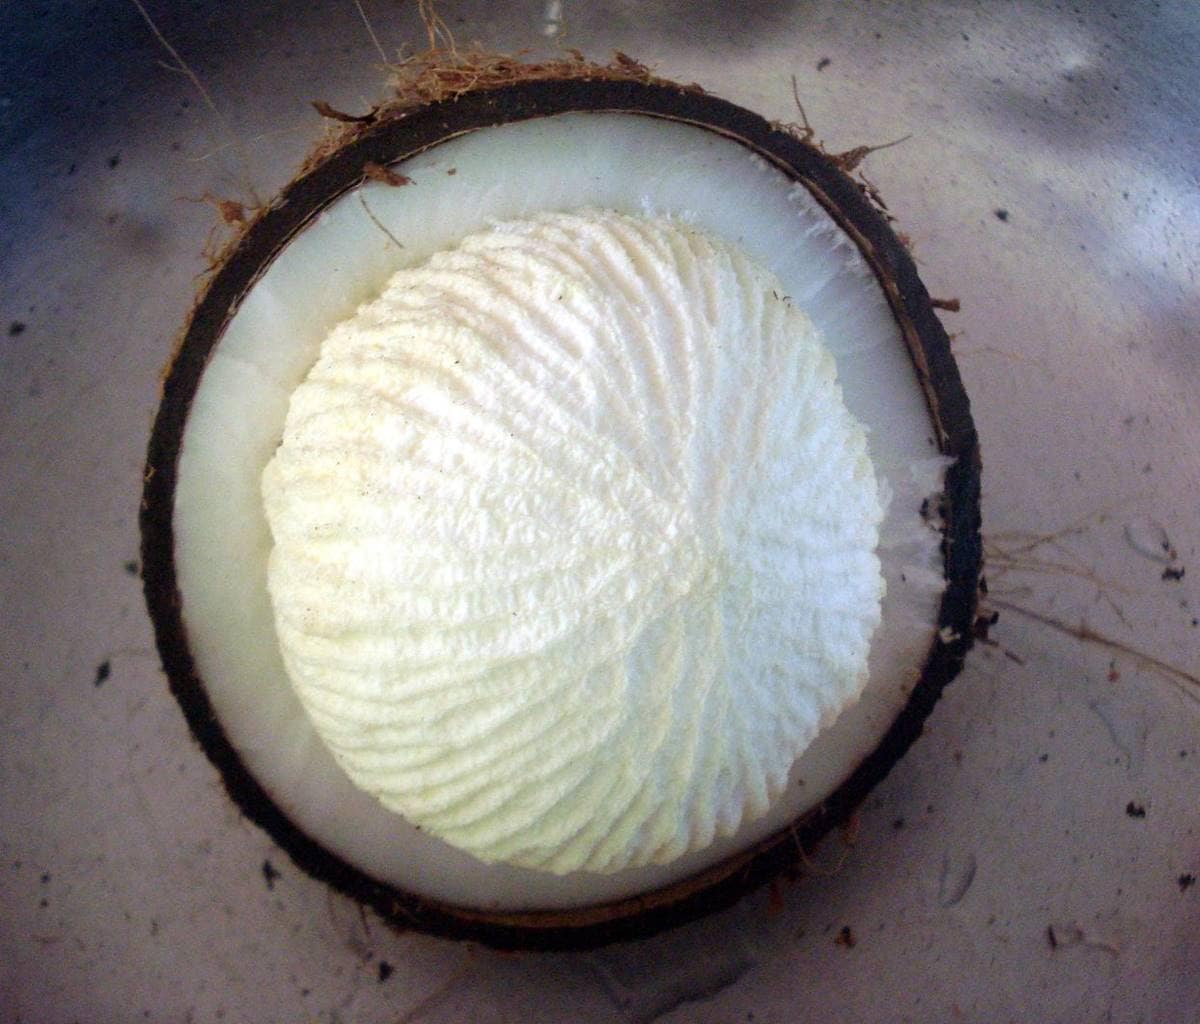 Kerala's Buy 1 Get 1 Free 50 days old Coconut sprout hookupcart